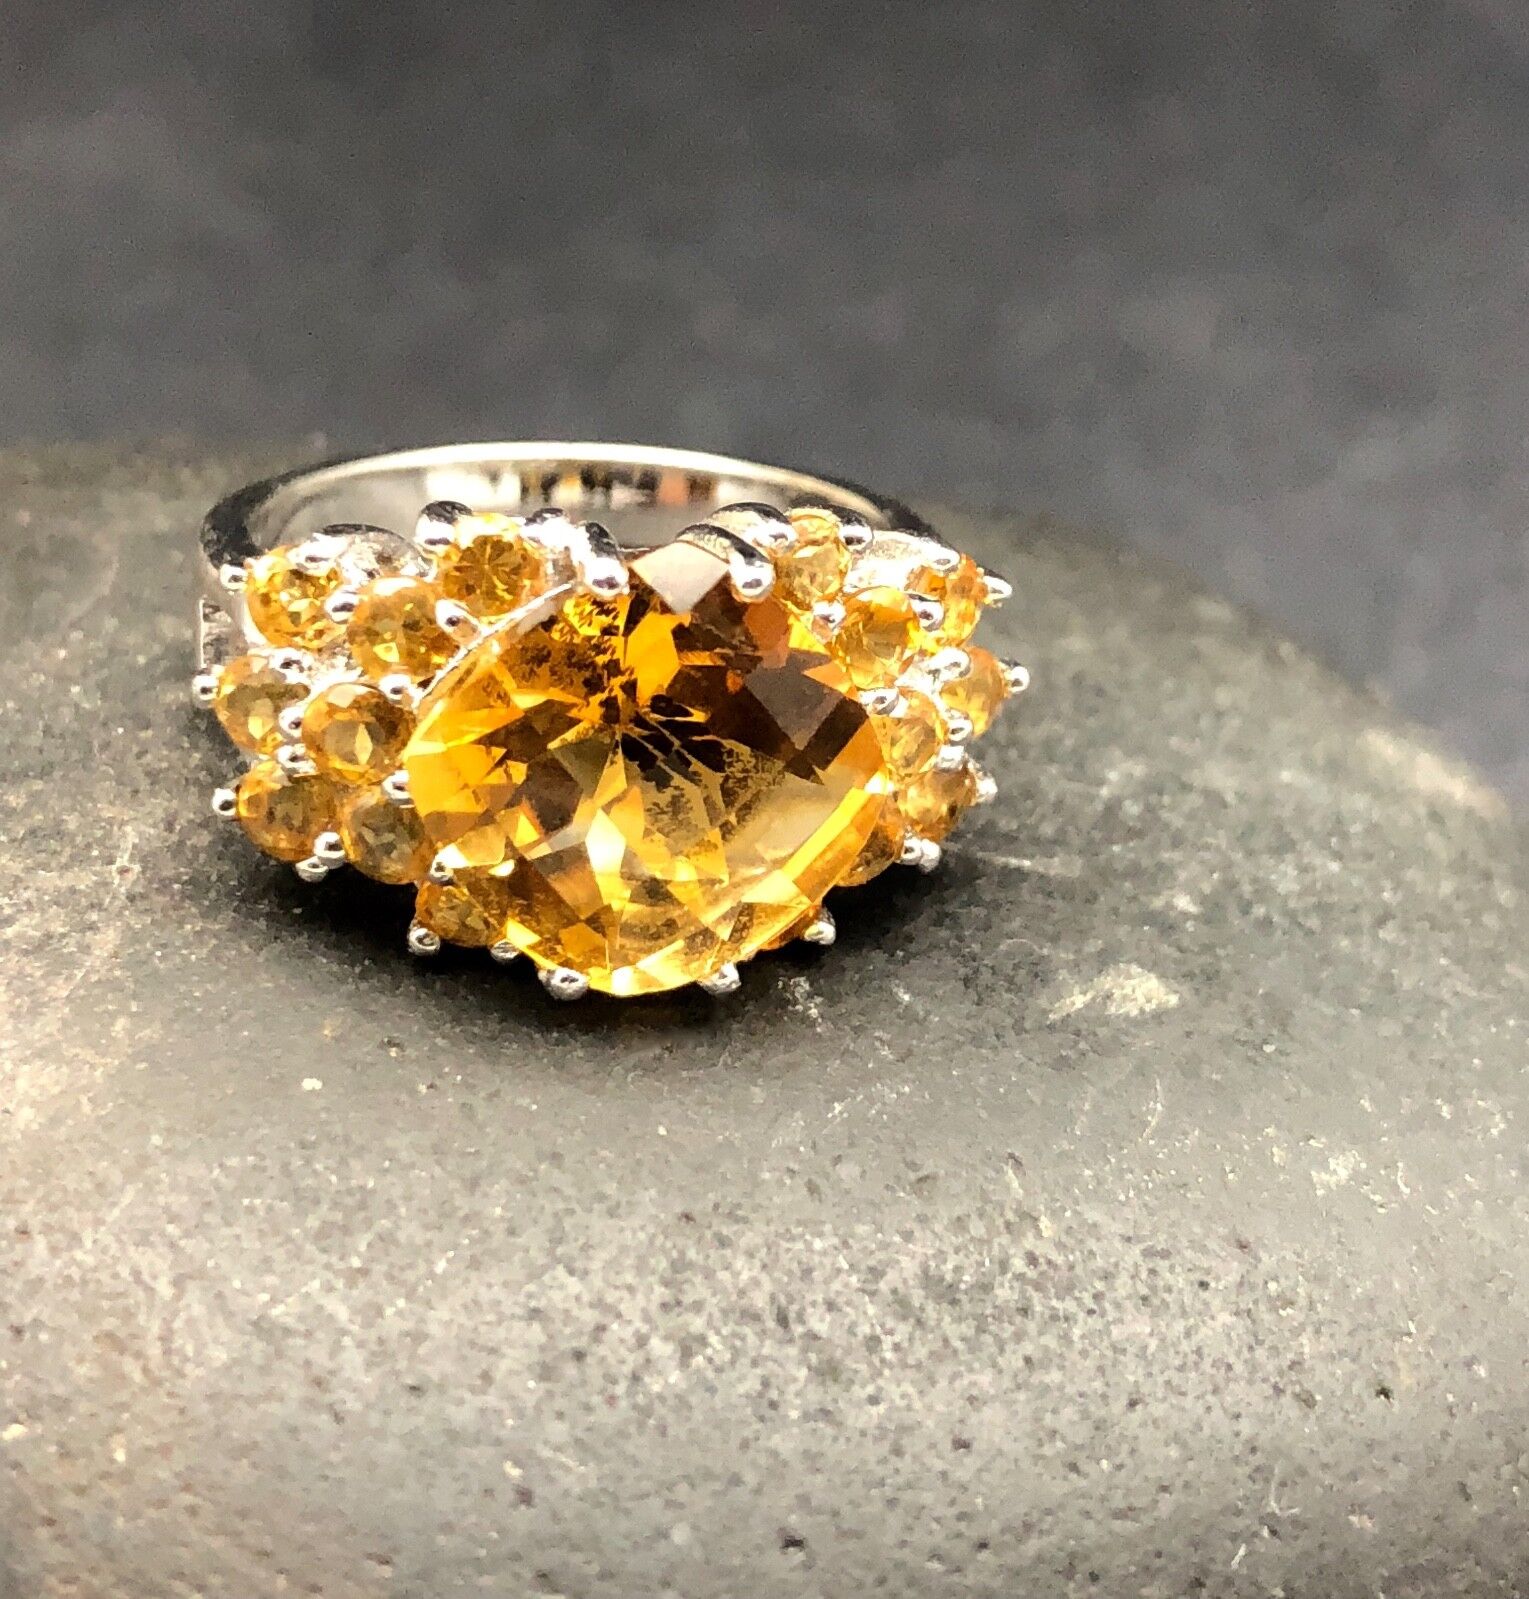 Golden Topaz And Diamond Ring Available For Immediate Sale At Sotheby's